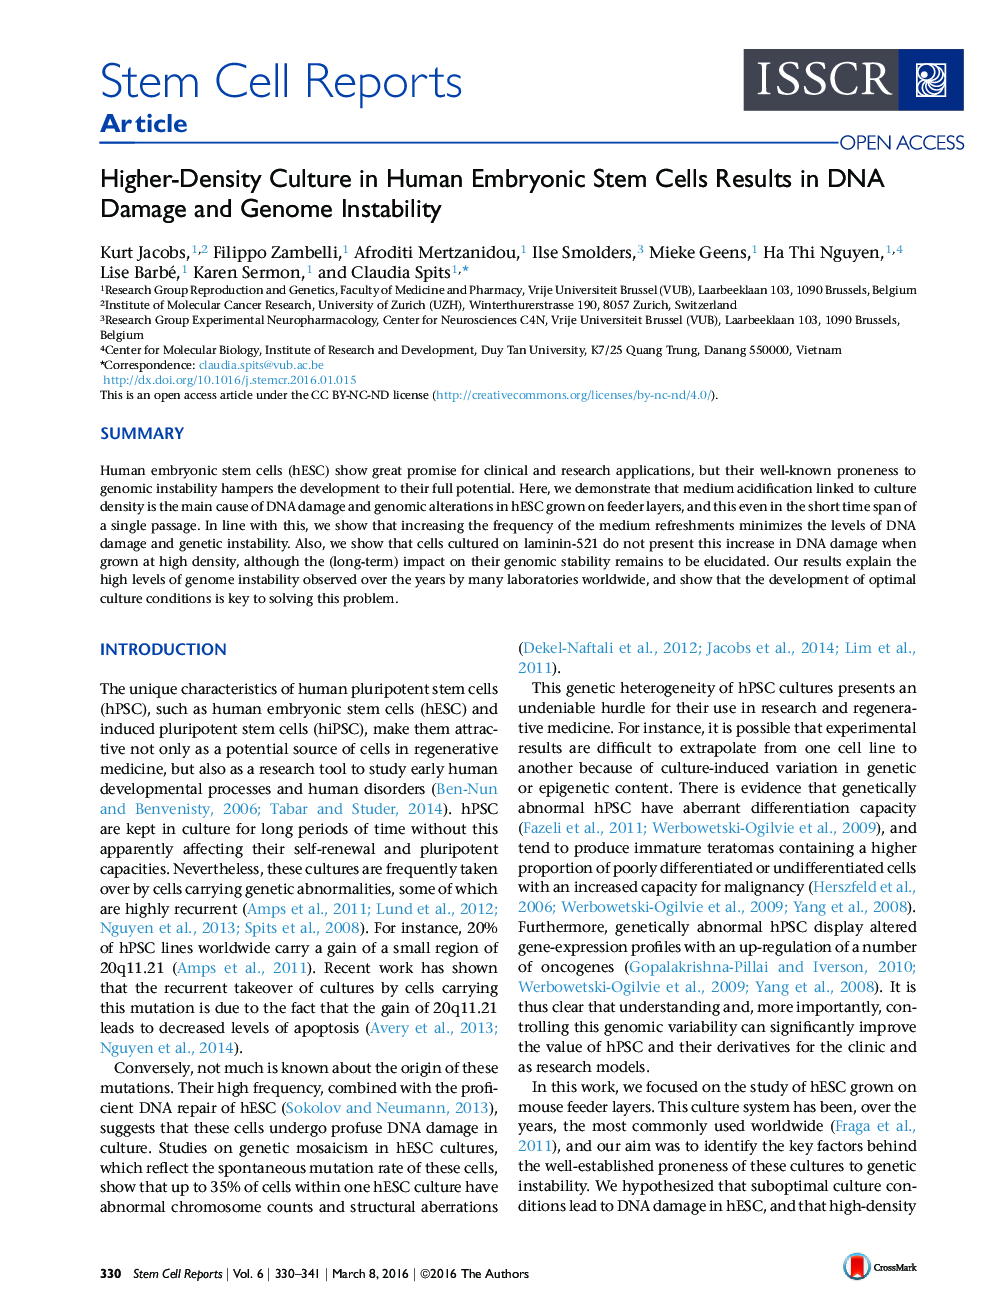 Higher-Density Culture in Human Embryonic Stem Cells Results in DNA Damage and Genome Instability 